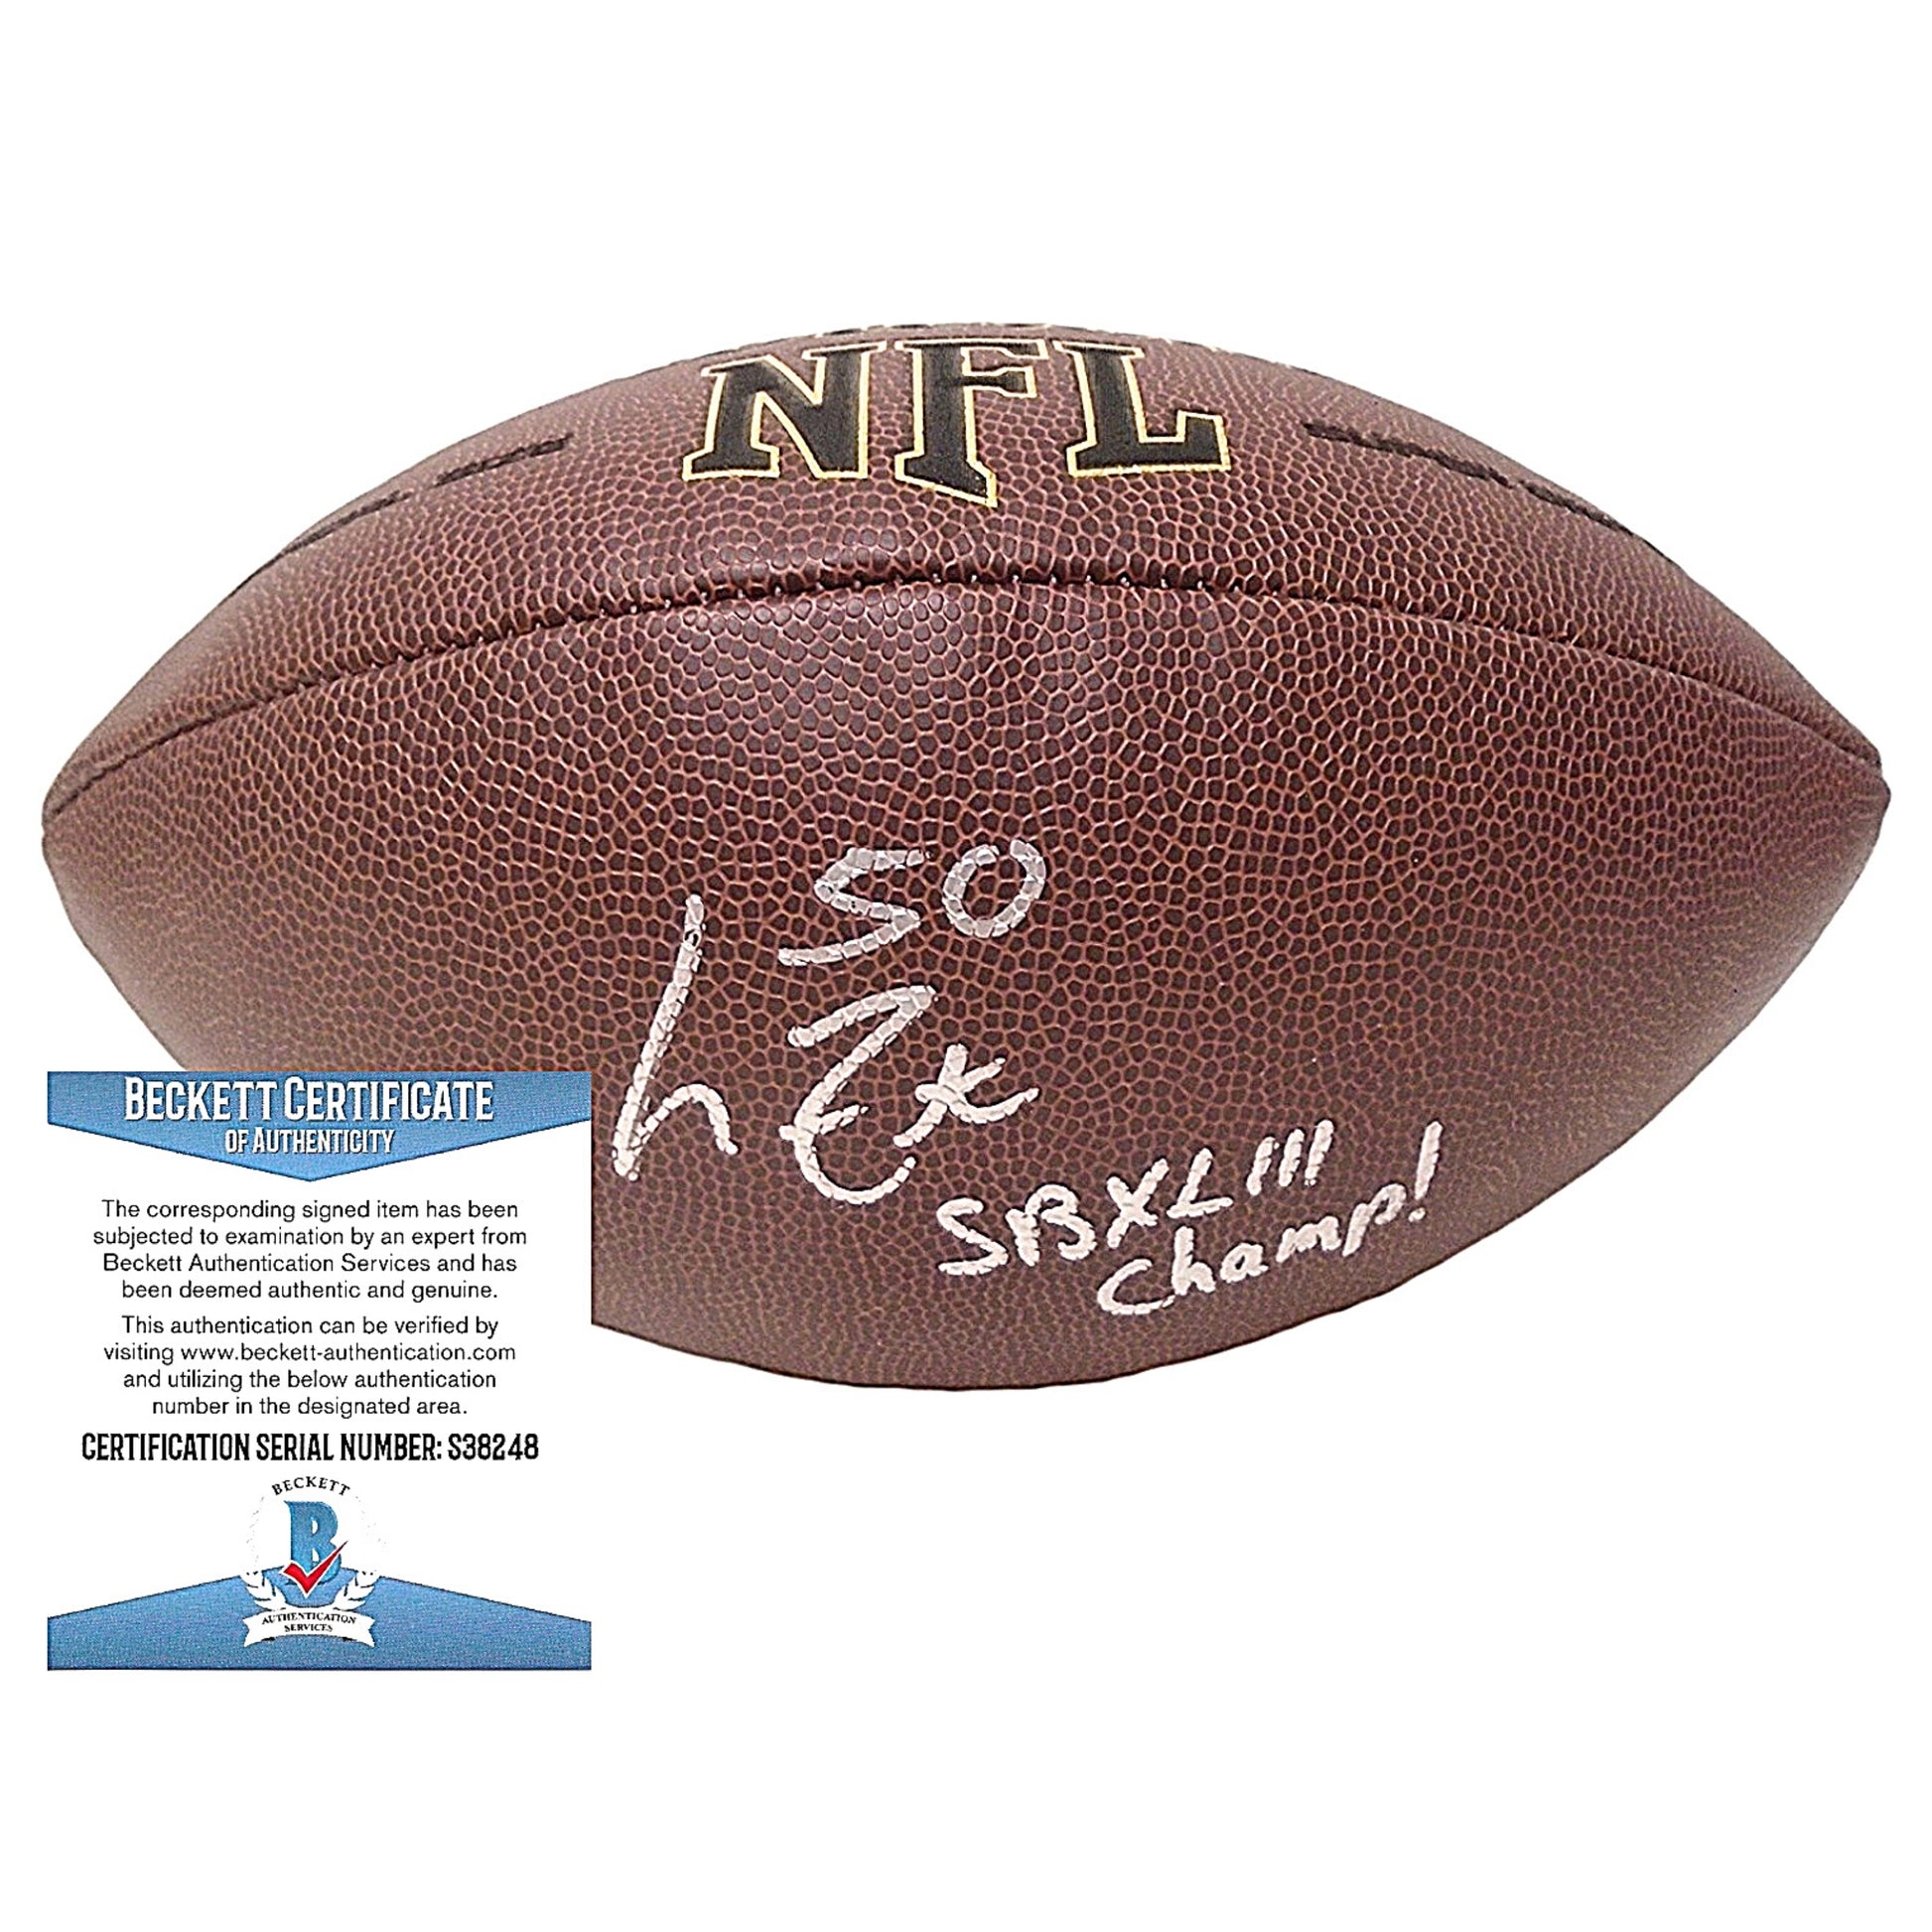 Footballs- Autographed- Larry Foote Signed NFL Wilson Composite Football - Pittsburgh Steelers - Proof Photo - Beckett BAS Authentication 101